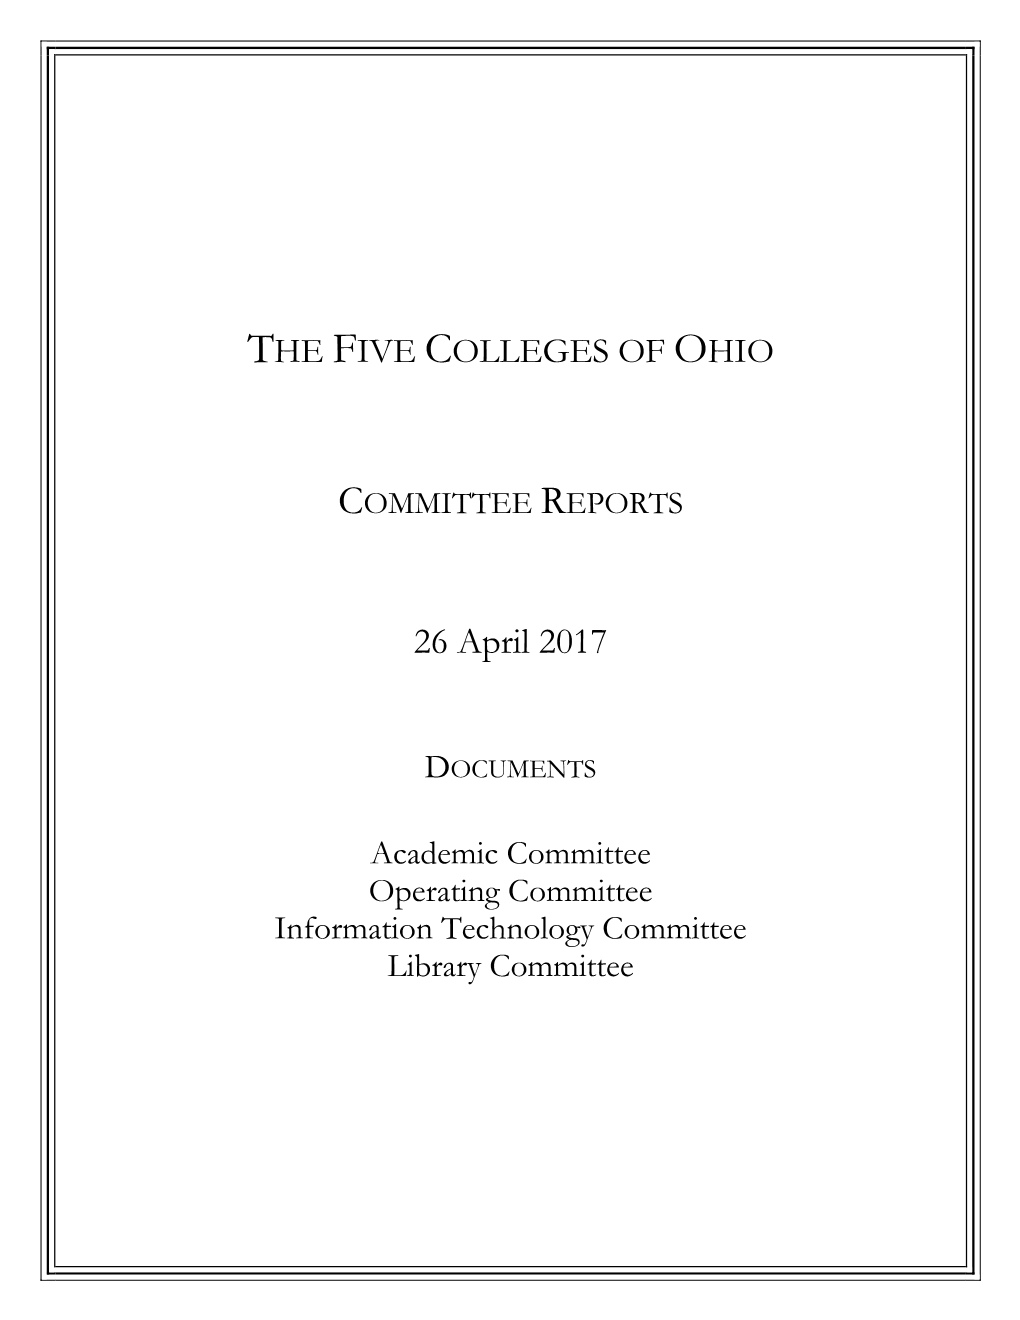 Combined OH5 Committee Report (April 2017)